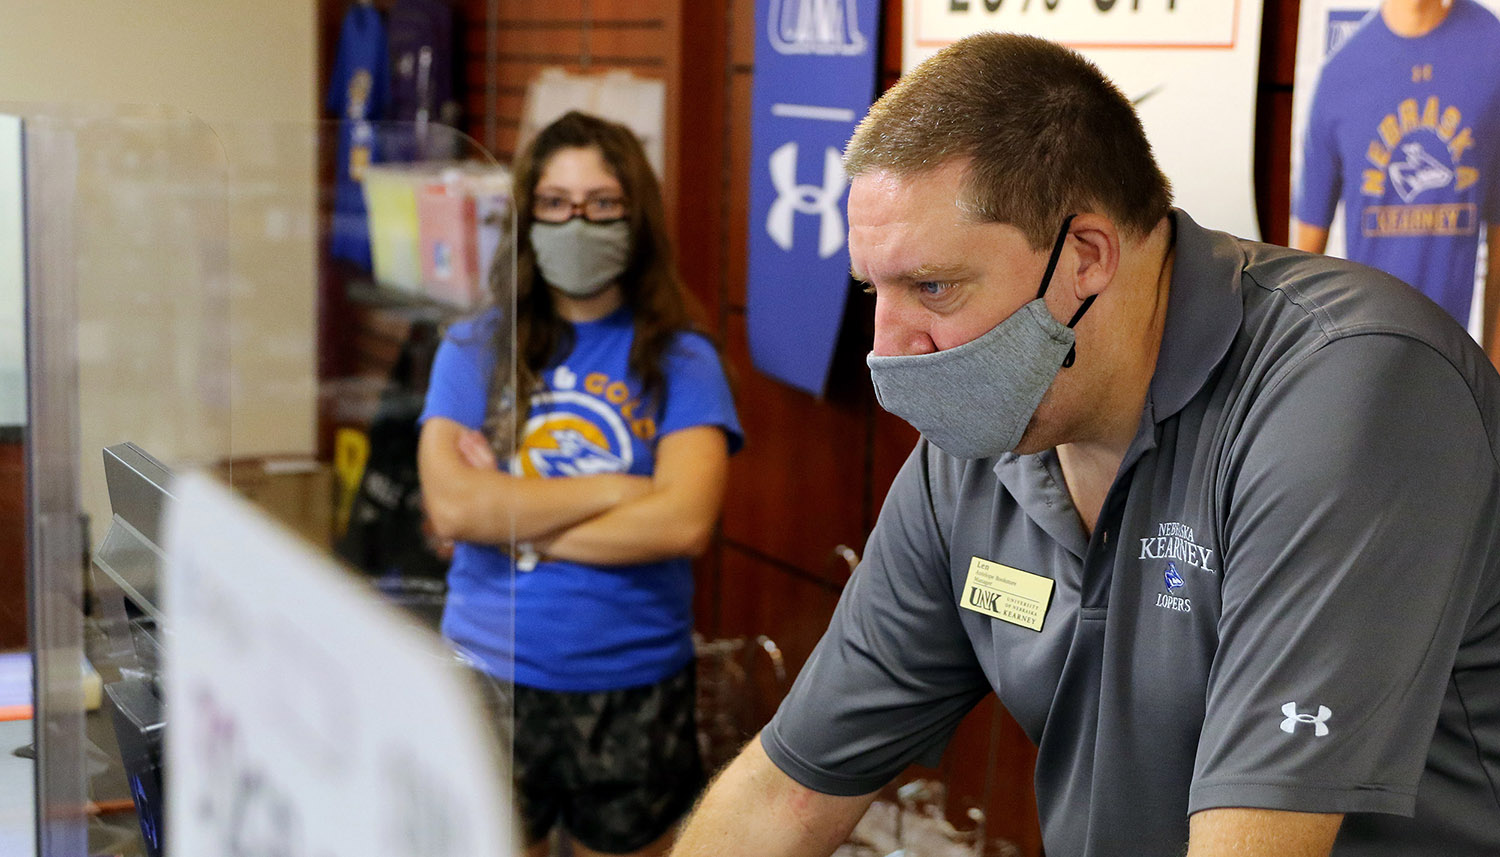 UNK is requiring students, staff, faculty and visitors to wear face masks in all shared spaces on campus this fall. (Photo by Todd Gottula, UNK Communications)